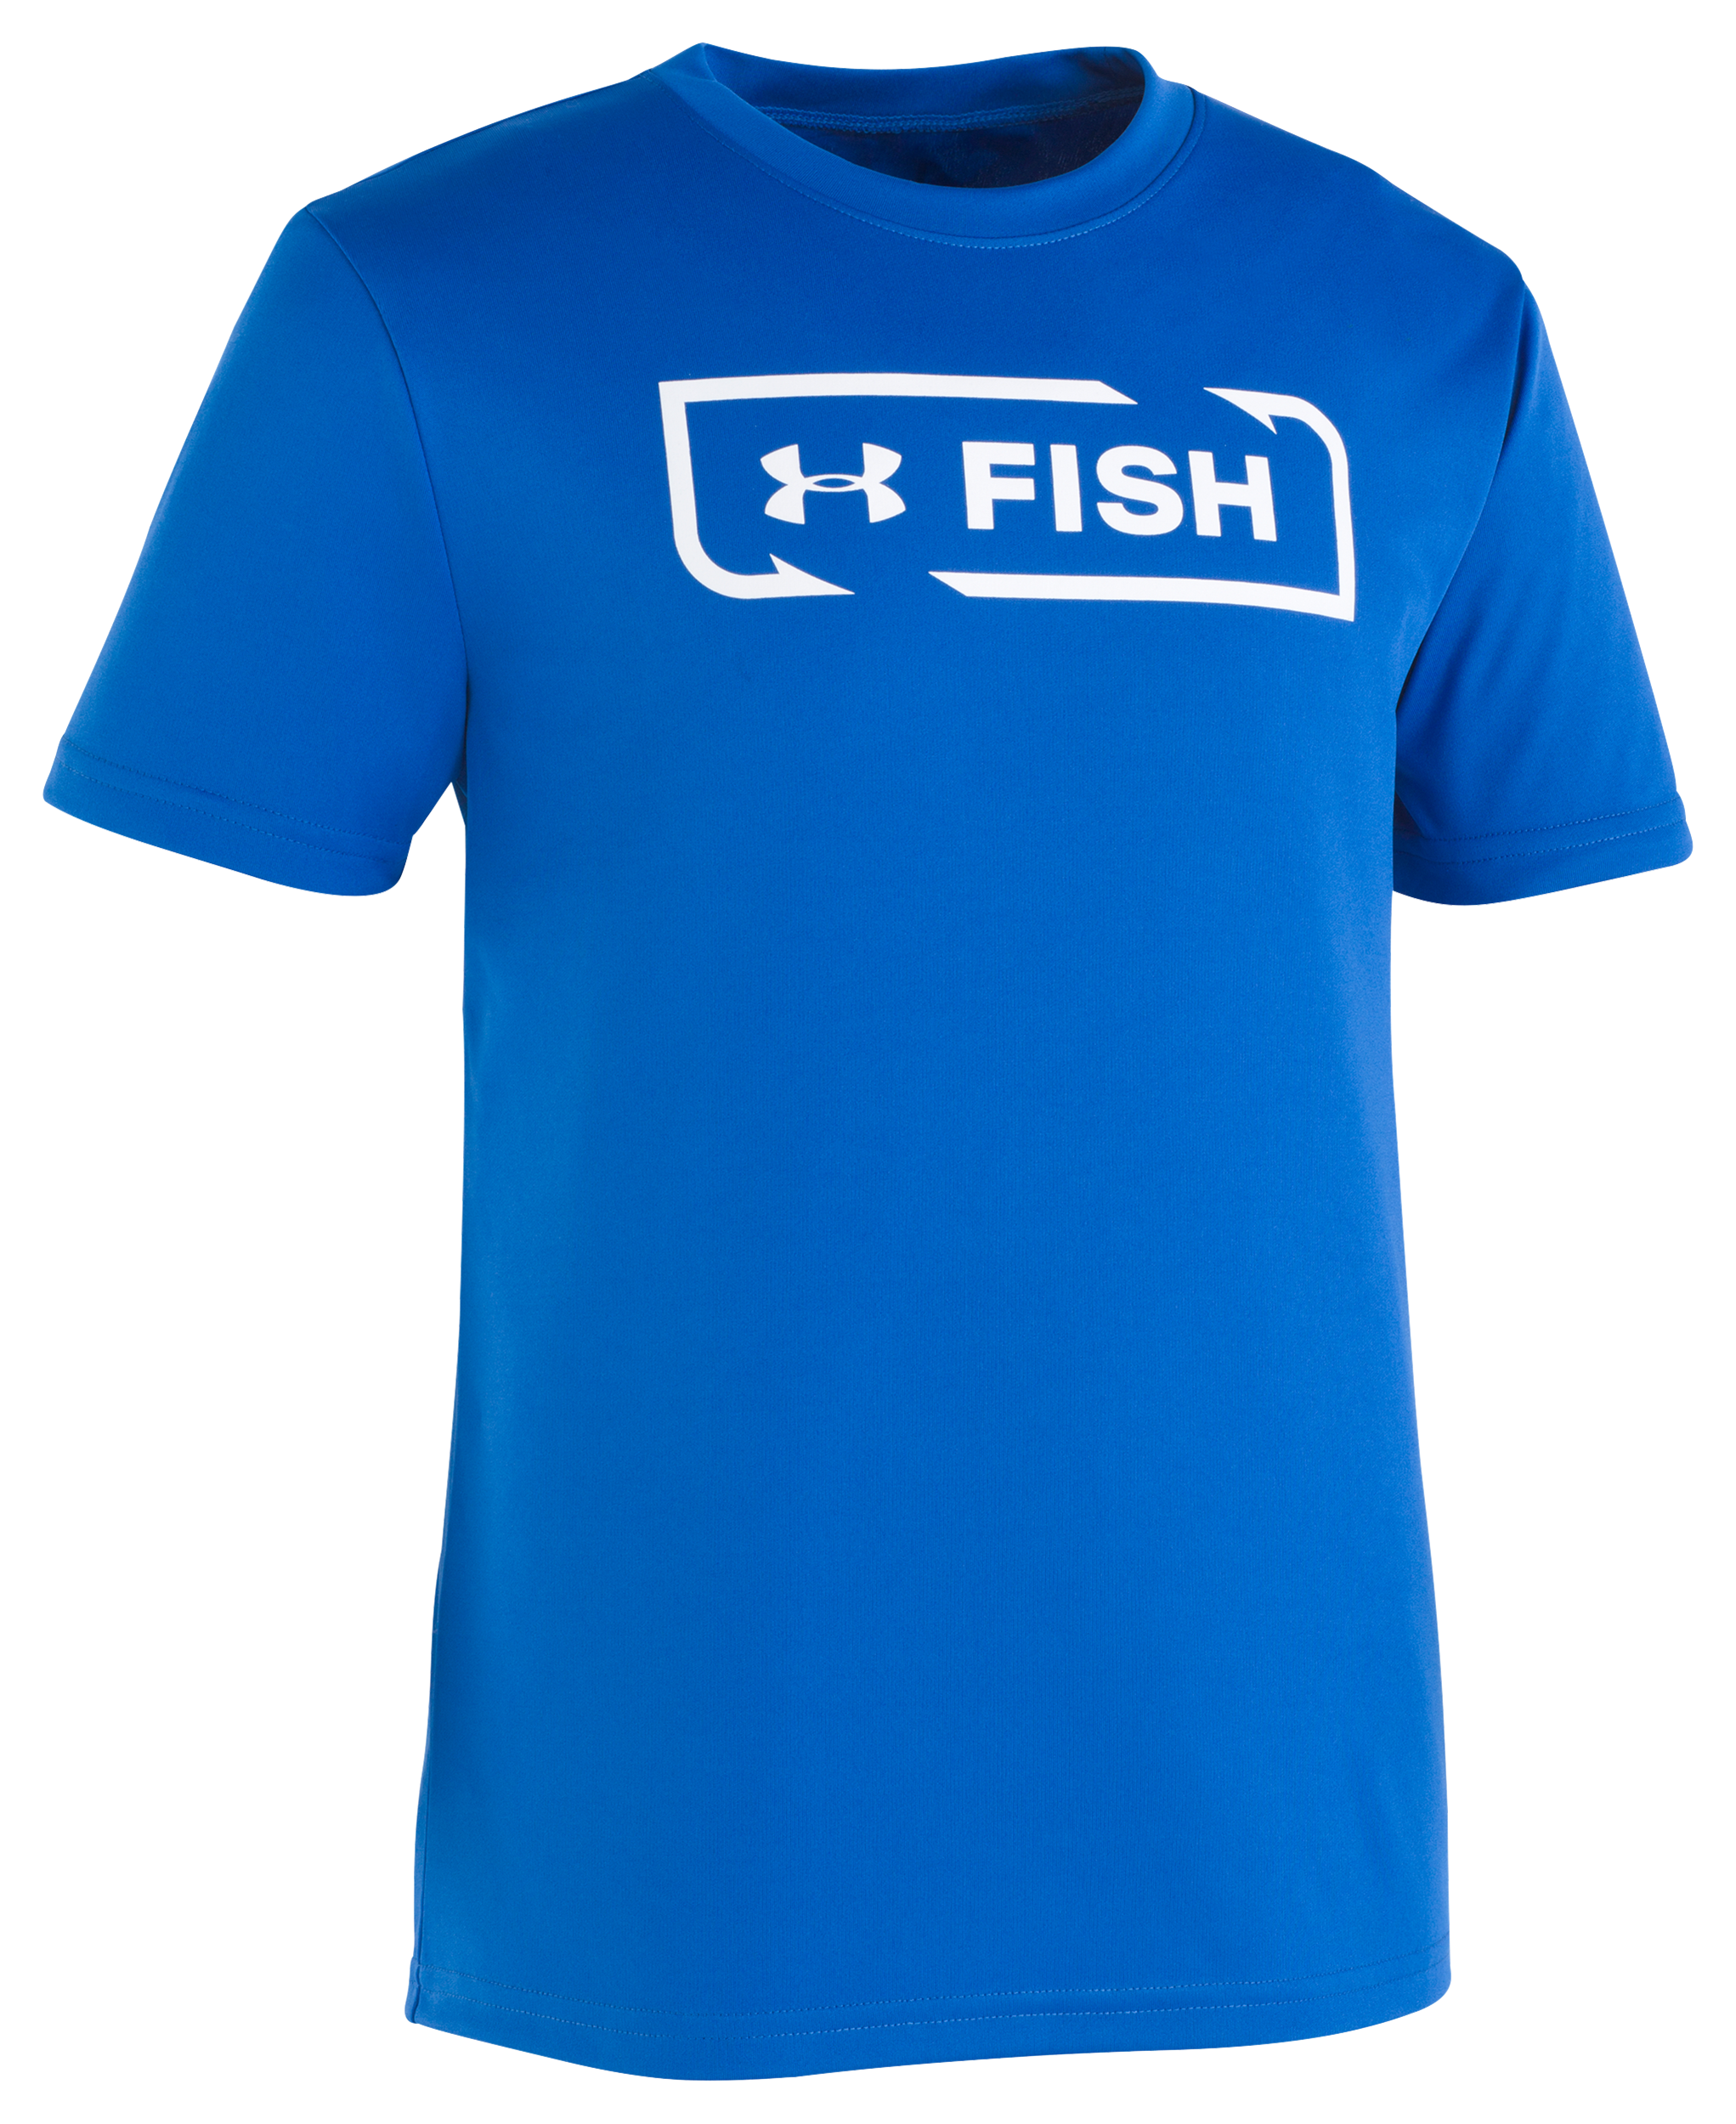 Under Armour Fish Logo T-Shirt for Toddlers or Kids